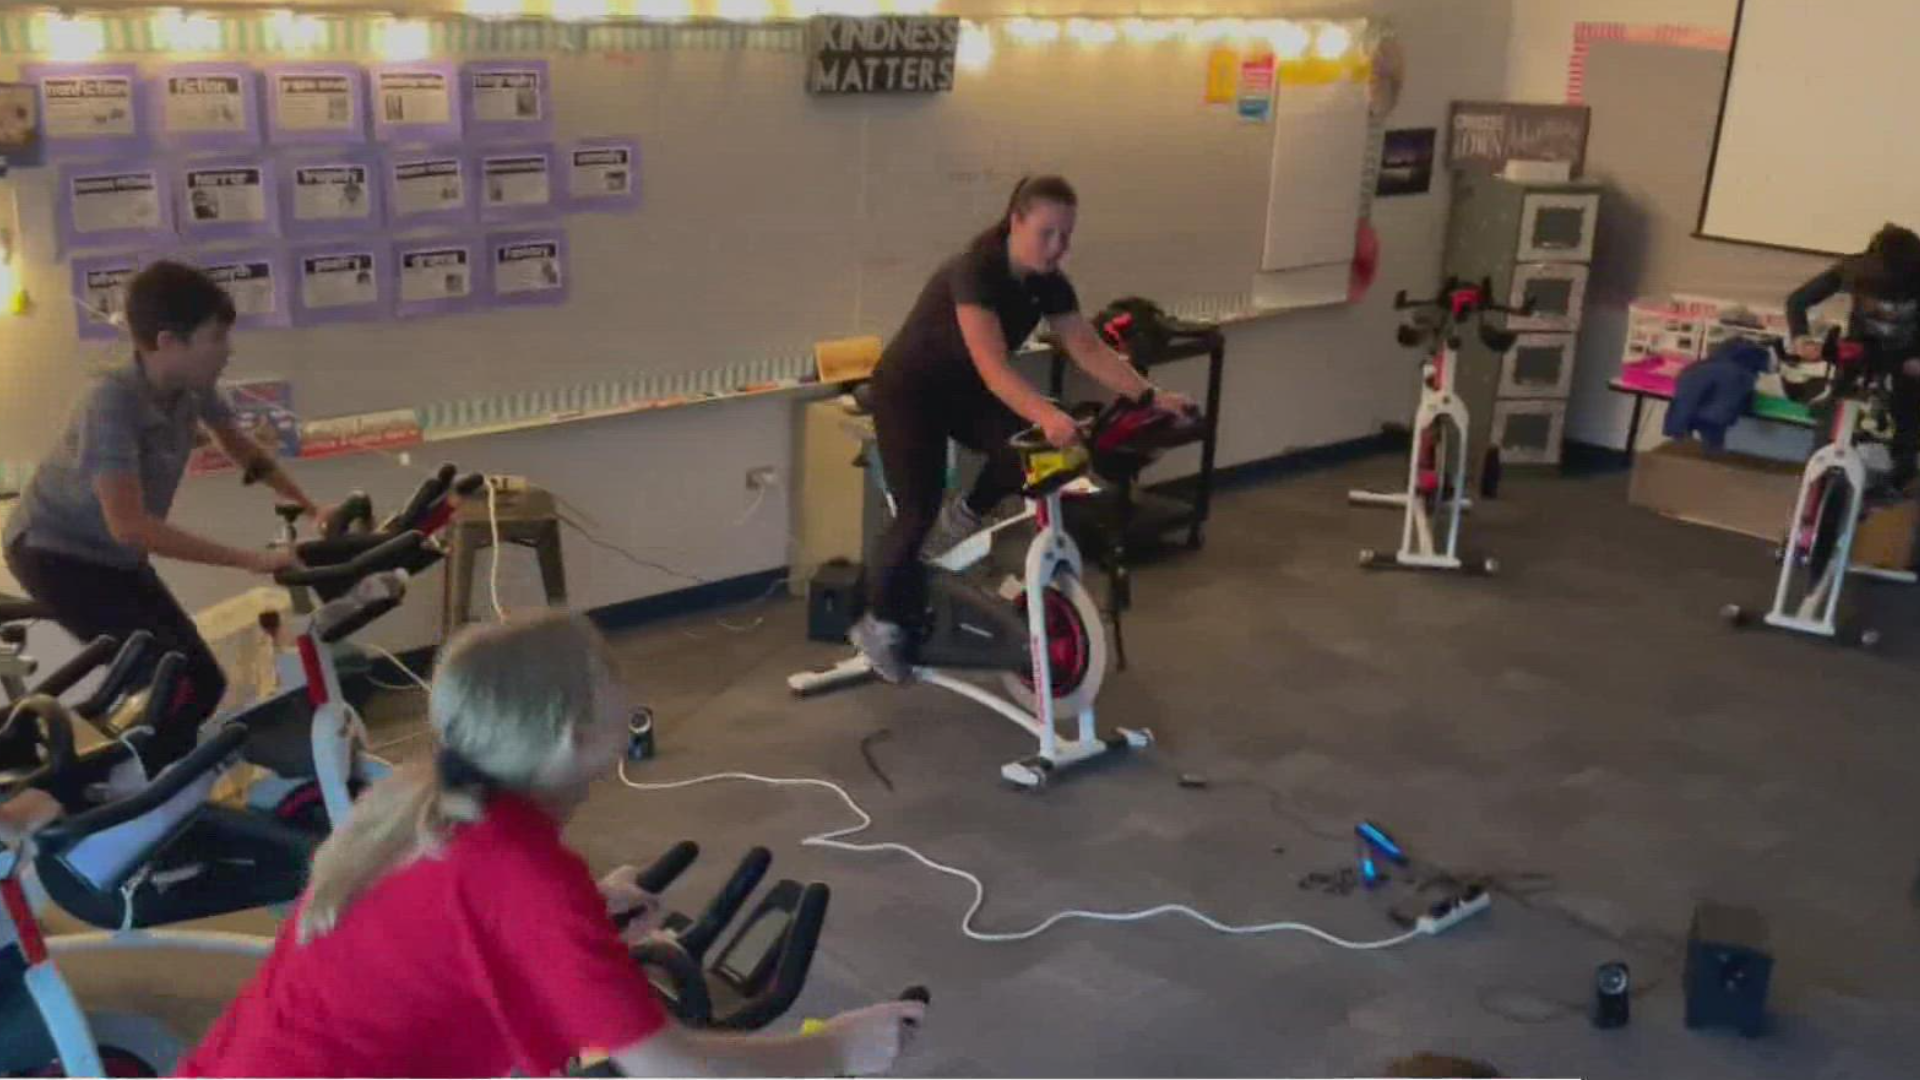 Three teachers at Payette Lakes Middle School teamed up to get 20 spin bikes to help their students focus.